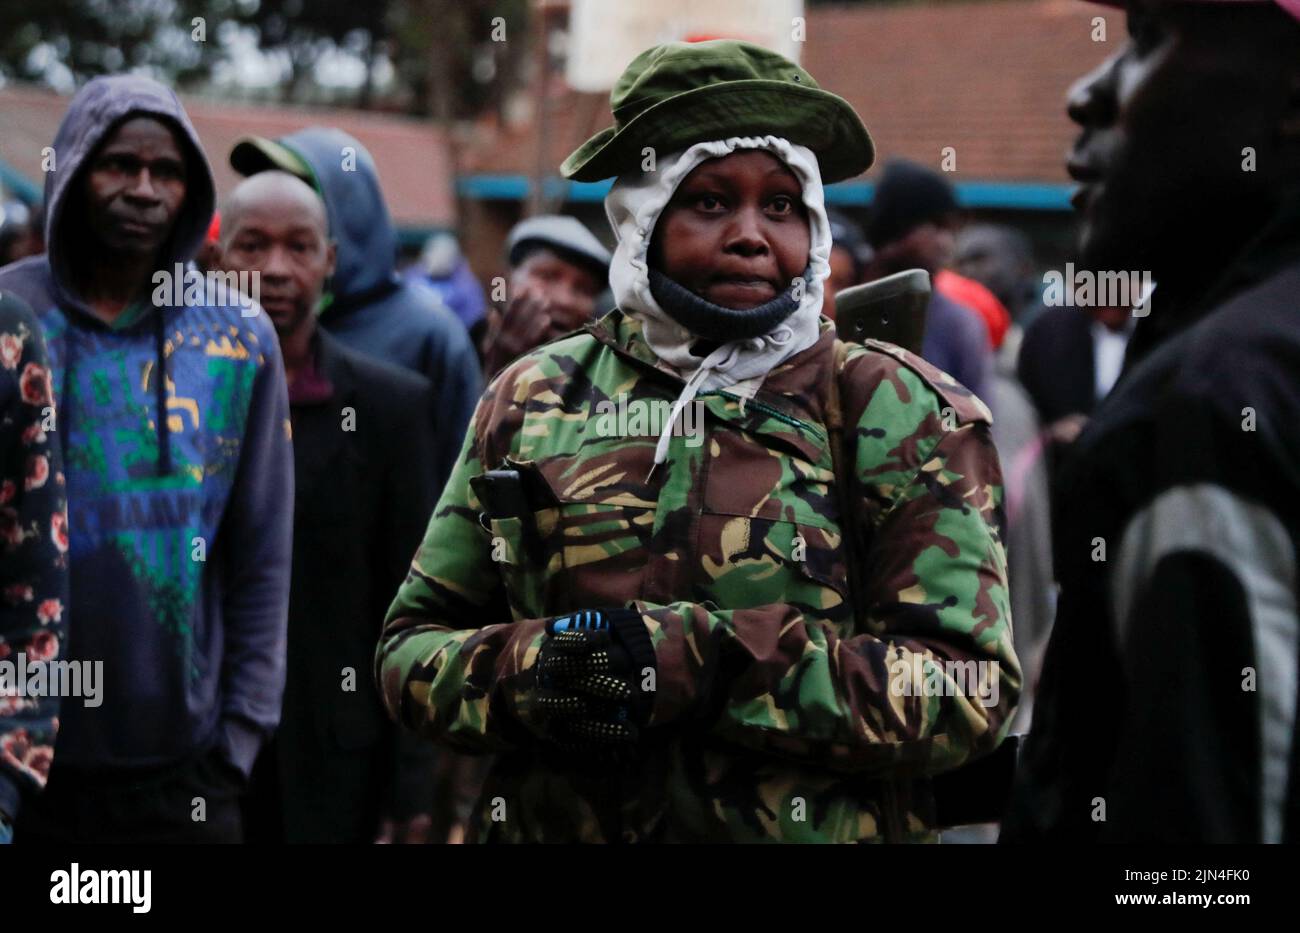 A police officer stands guard as voters queue before casting their ballots during the general election by the Independent Electoral and Boundaries Commission (IEBC) at the Kibera primary school in Nairobi, Kenya August 9, 2022. REUTERS/Thomas Mukoya Stock Photo